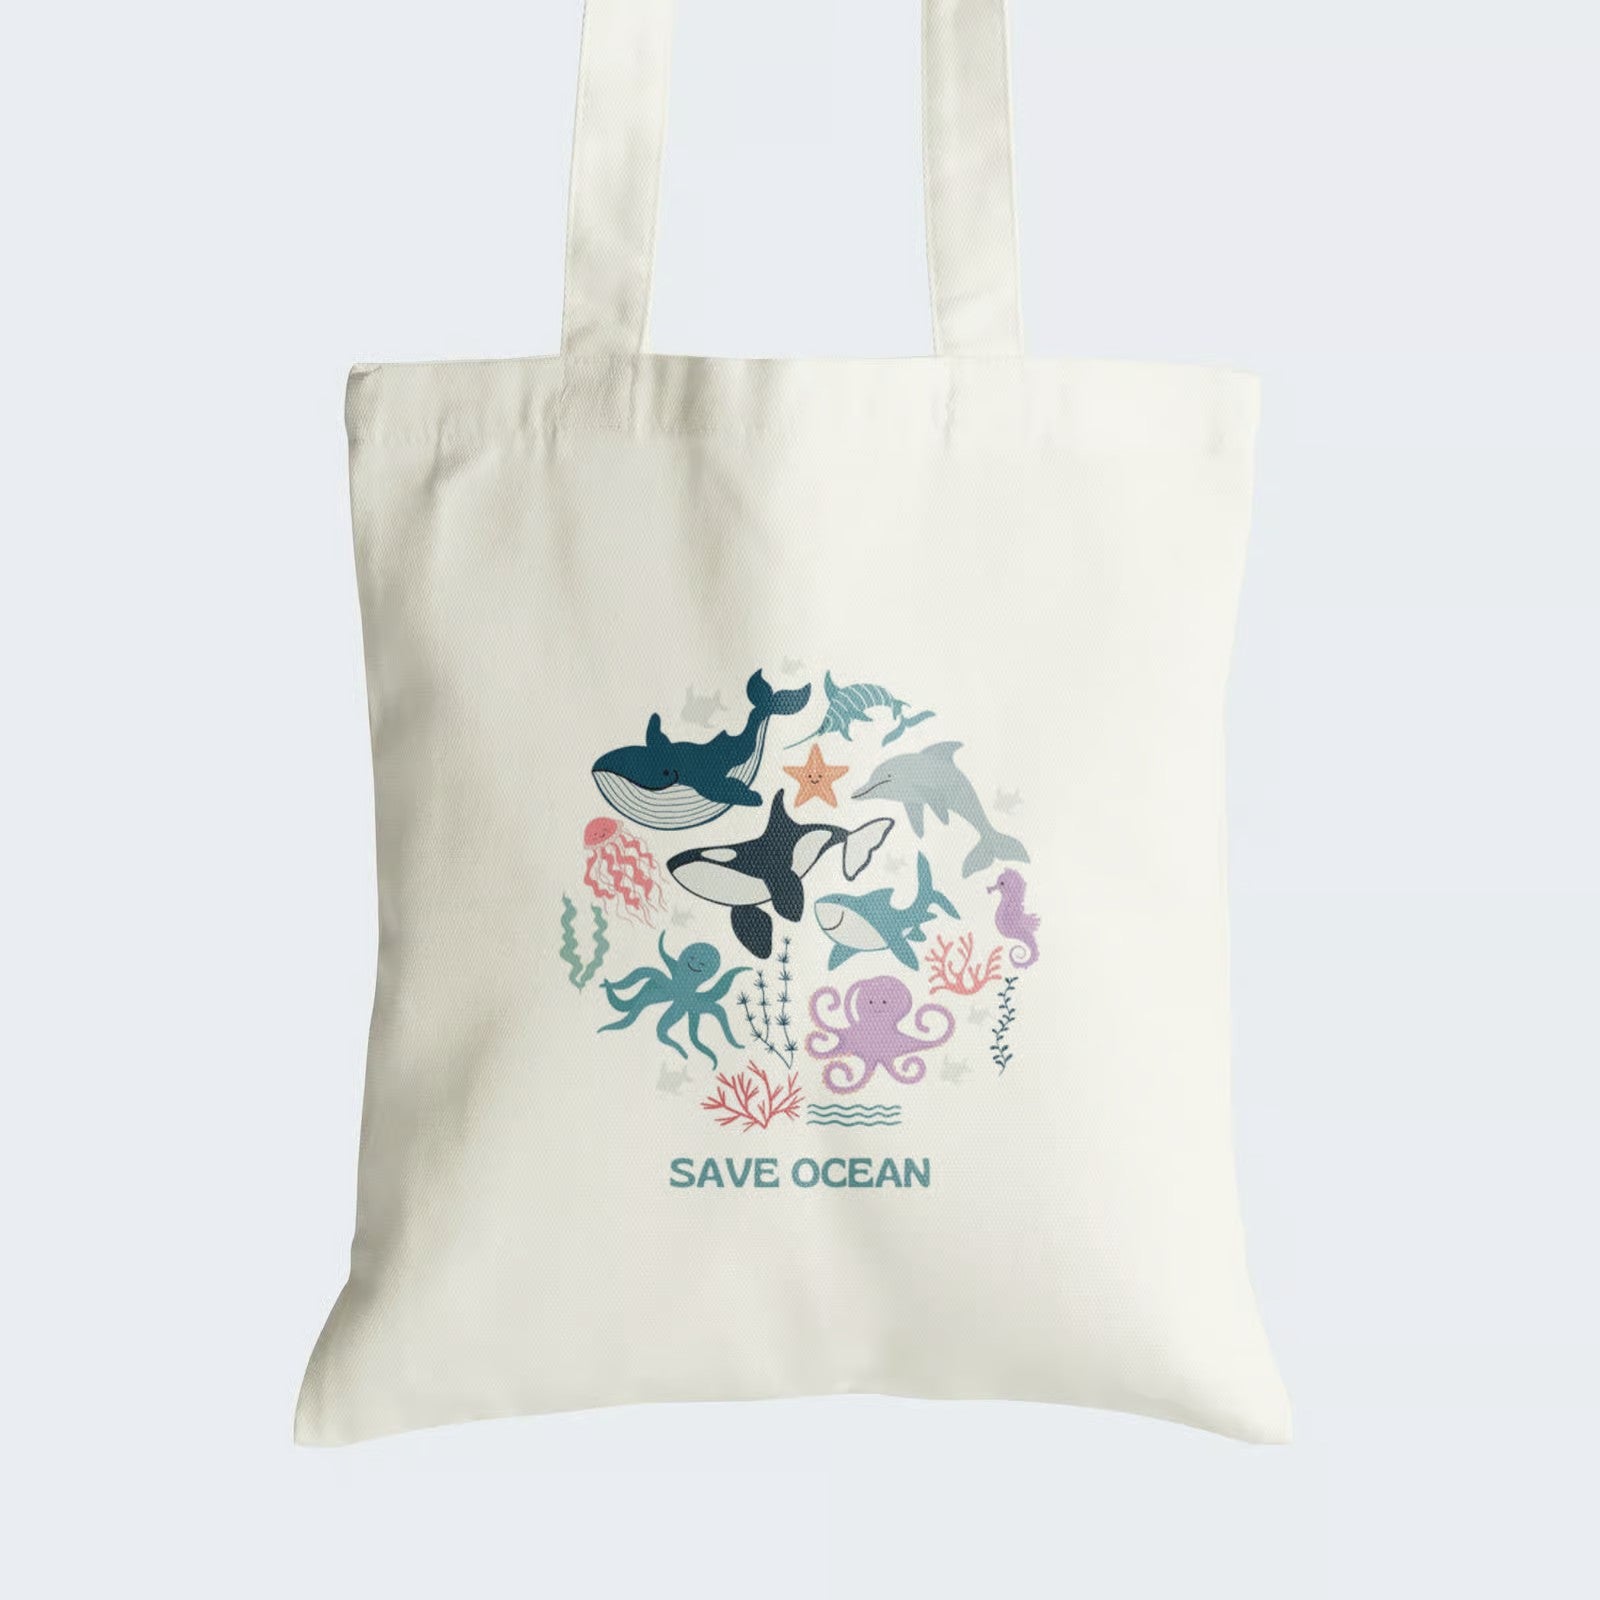 Elevate your style and champion marine conservation with our "SAVE OCEAN" Cotton Canvas Tote Bag. This tote showcases a charming cartoonish circle of marine animals, conveying a vital message to protect our oceans. Crafted for both durability and style, it includes a secure zipper closure for daily convenience. Carry the message of marine life conservation in a fashionable way with our impactful Cotton Canvas Tote Bag. Order yours today and help safeguard our oceans!